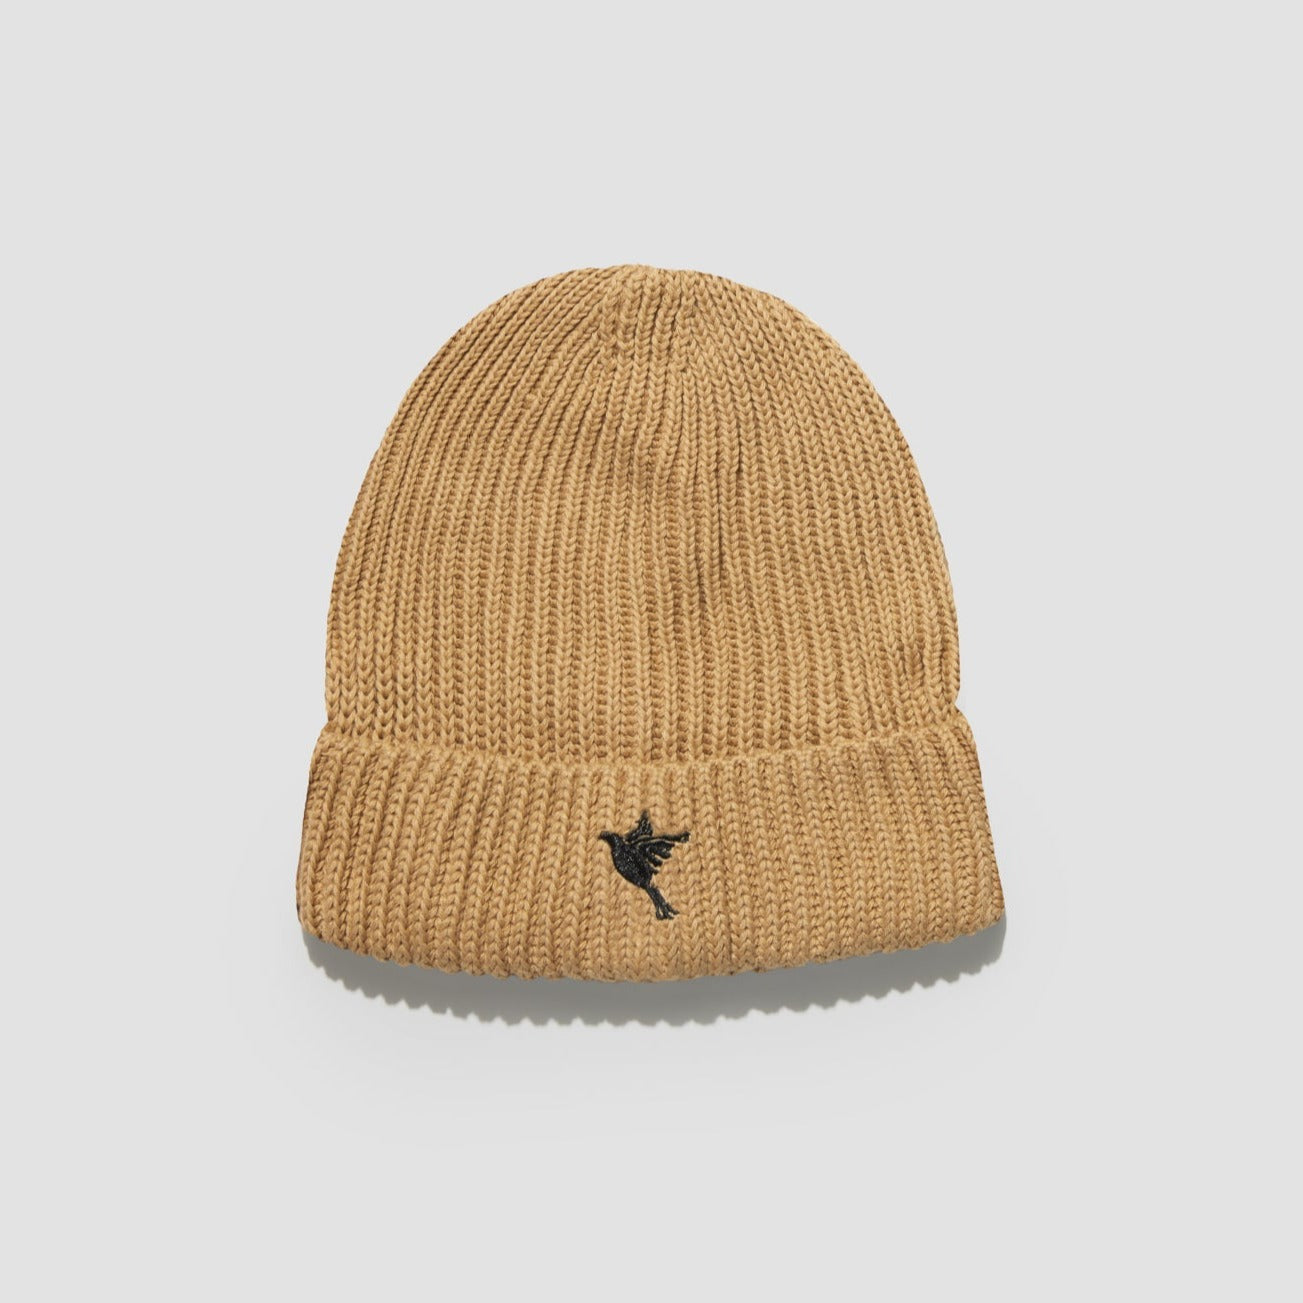 BY TPL ® Beanie Knitted Brown [Black Dove] - The Proper Label ™